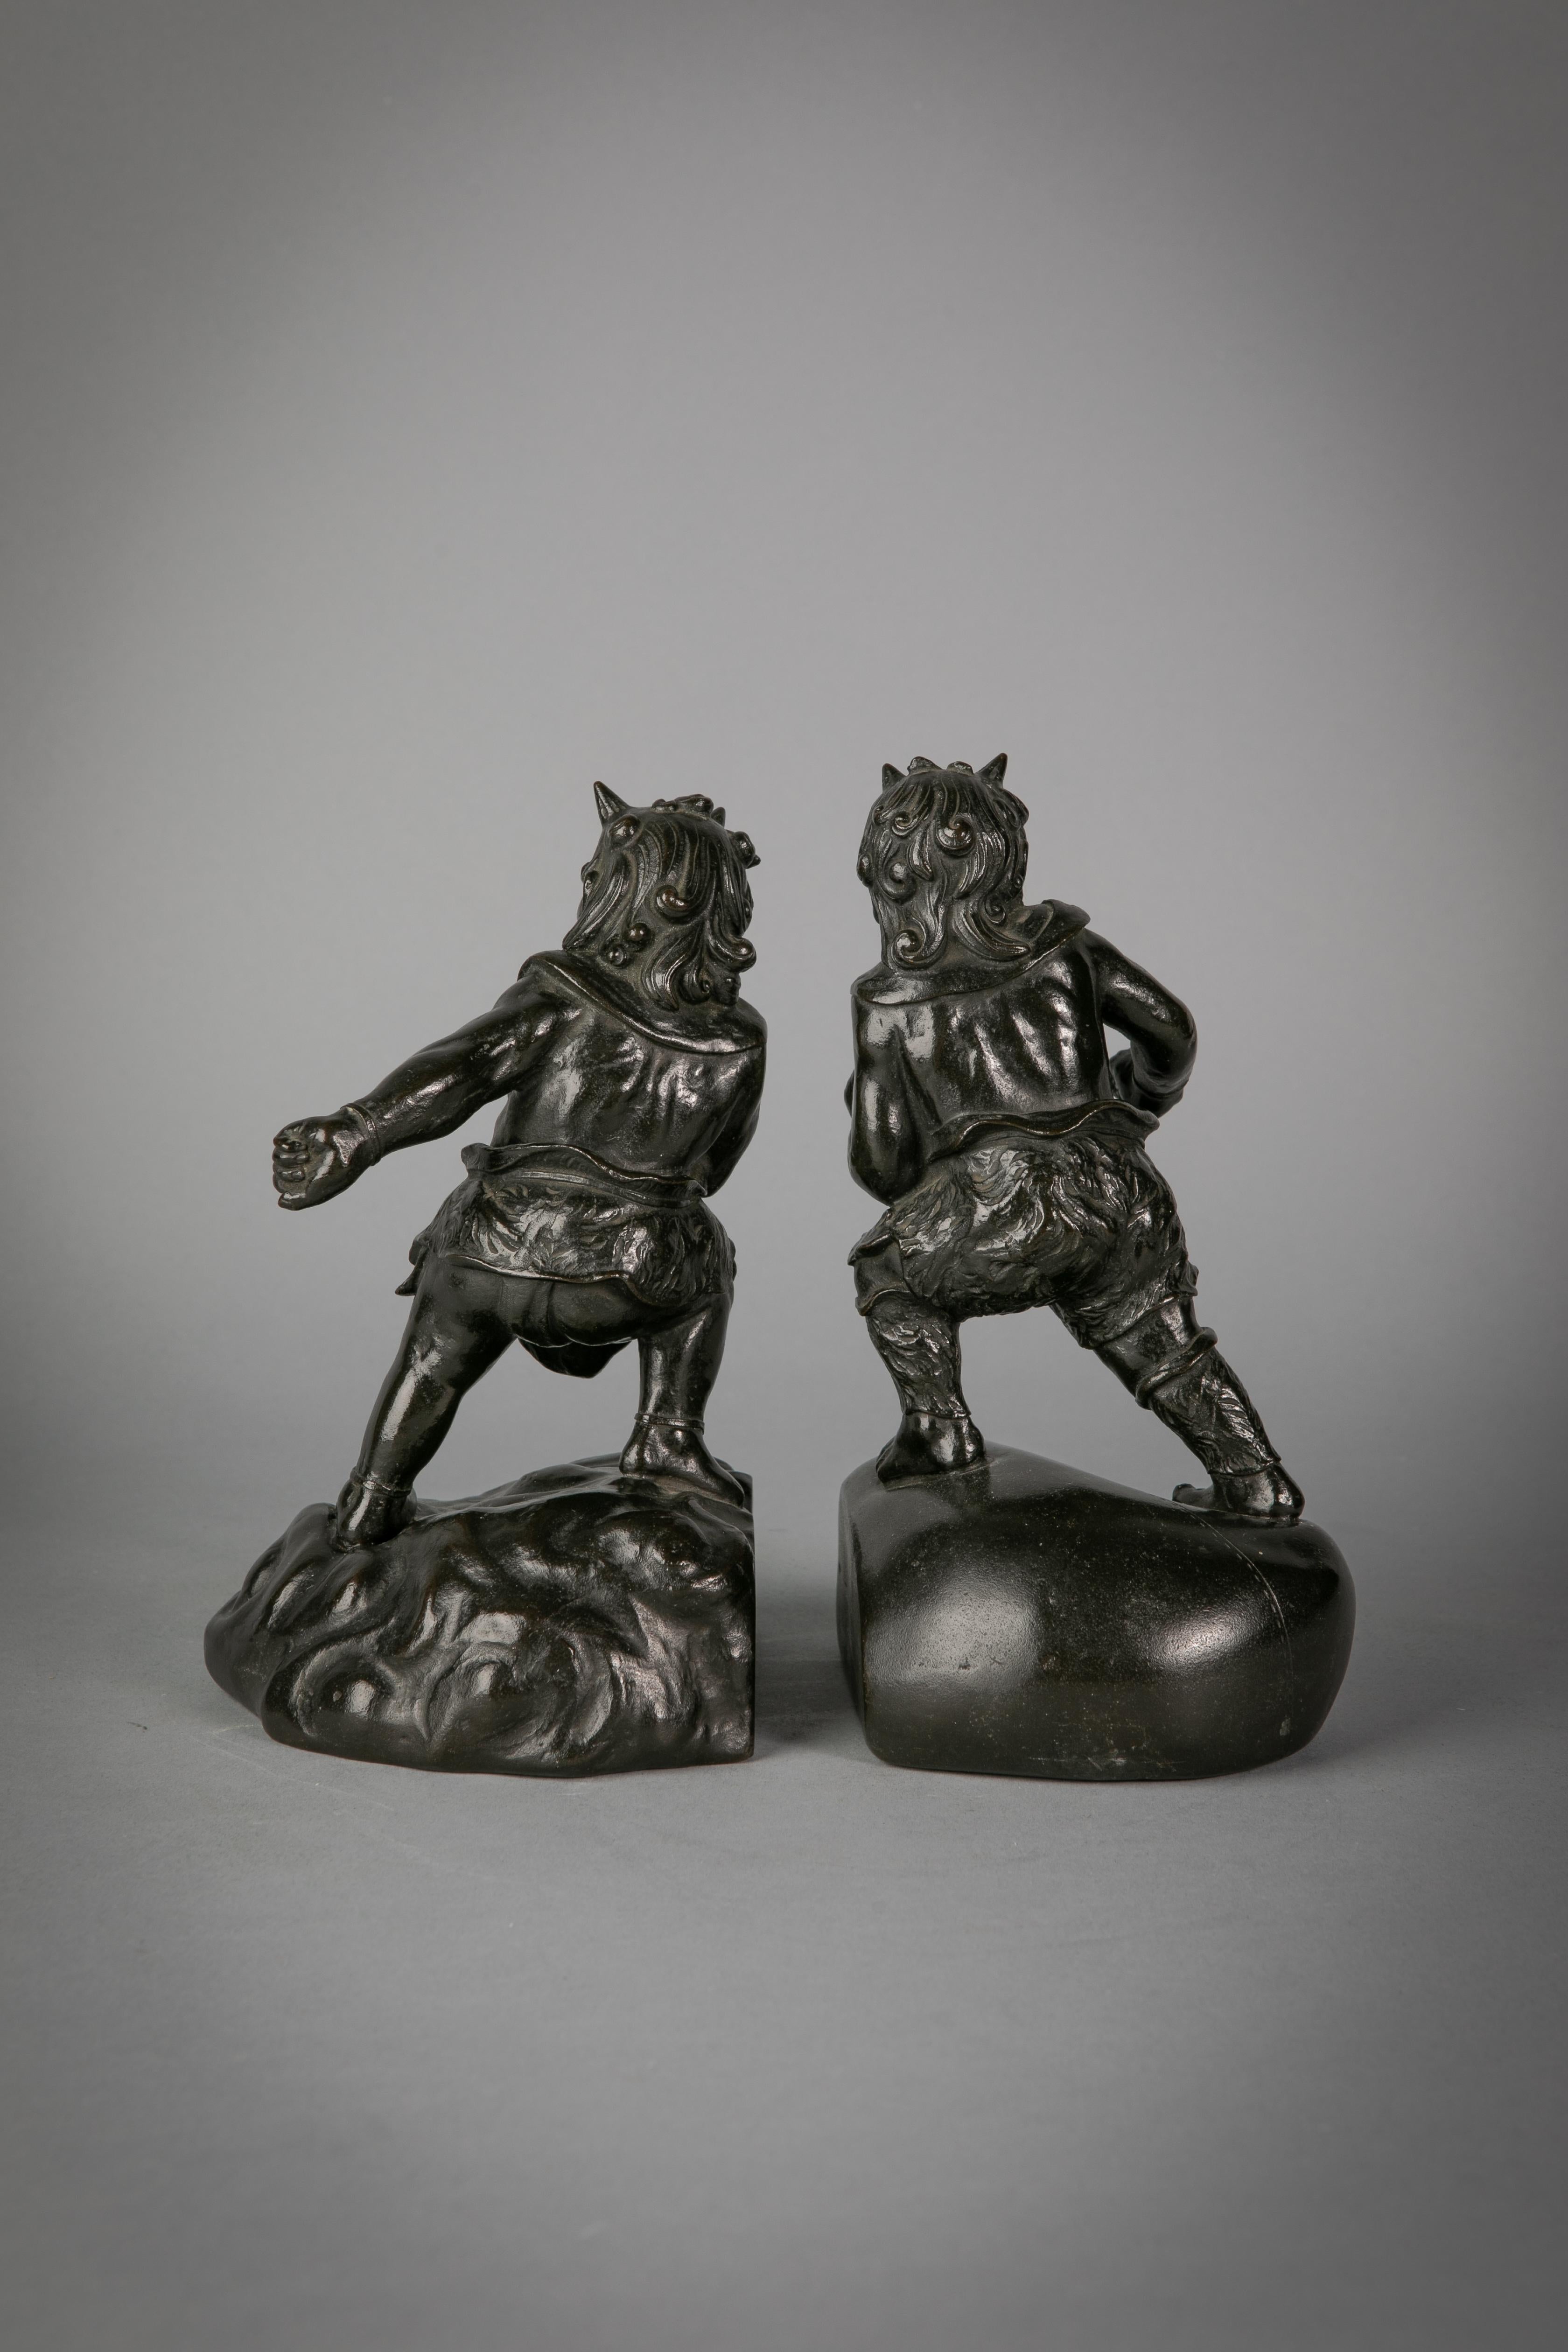 Pair of Japanese bronze bookends, circa 1880.